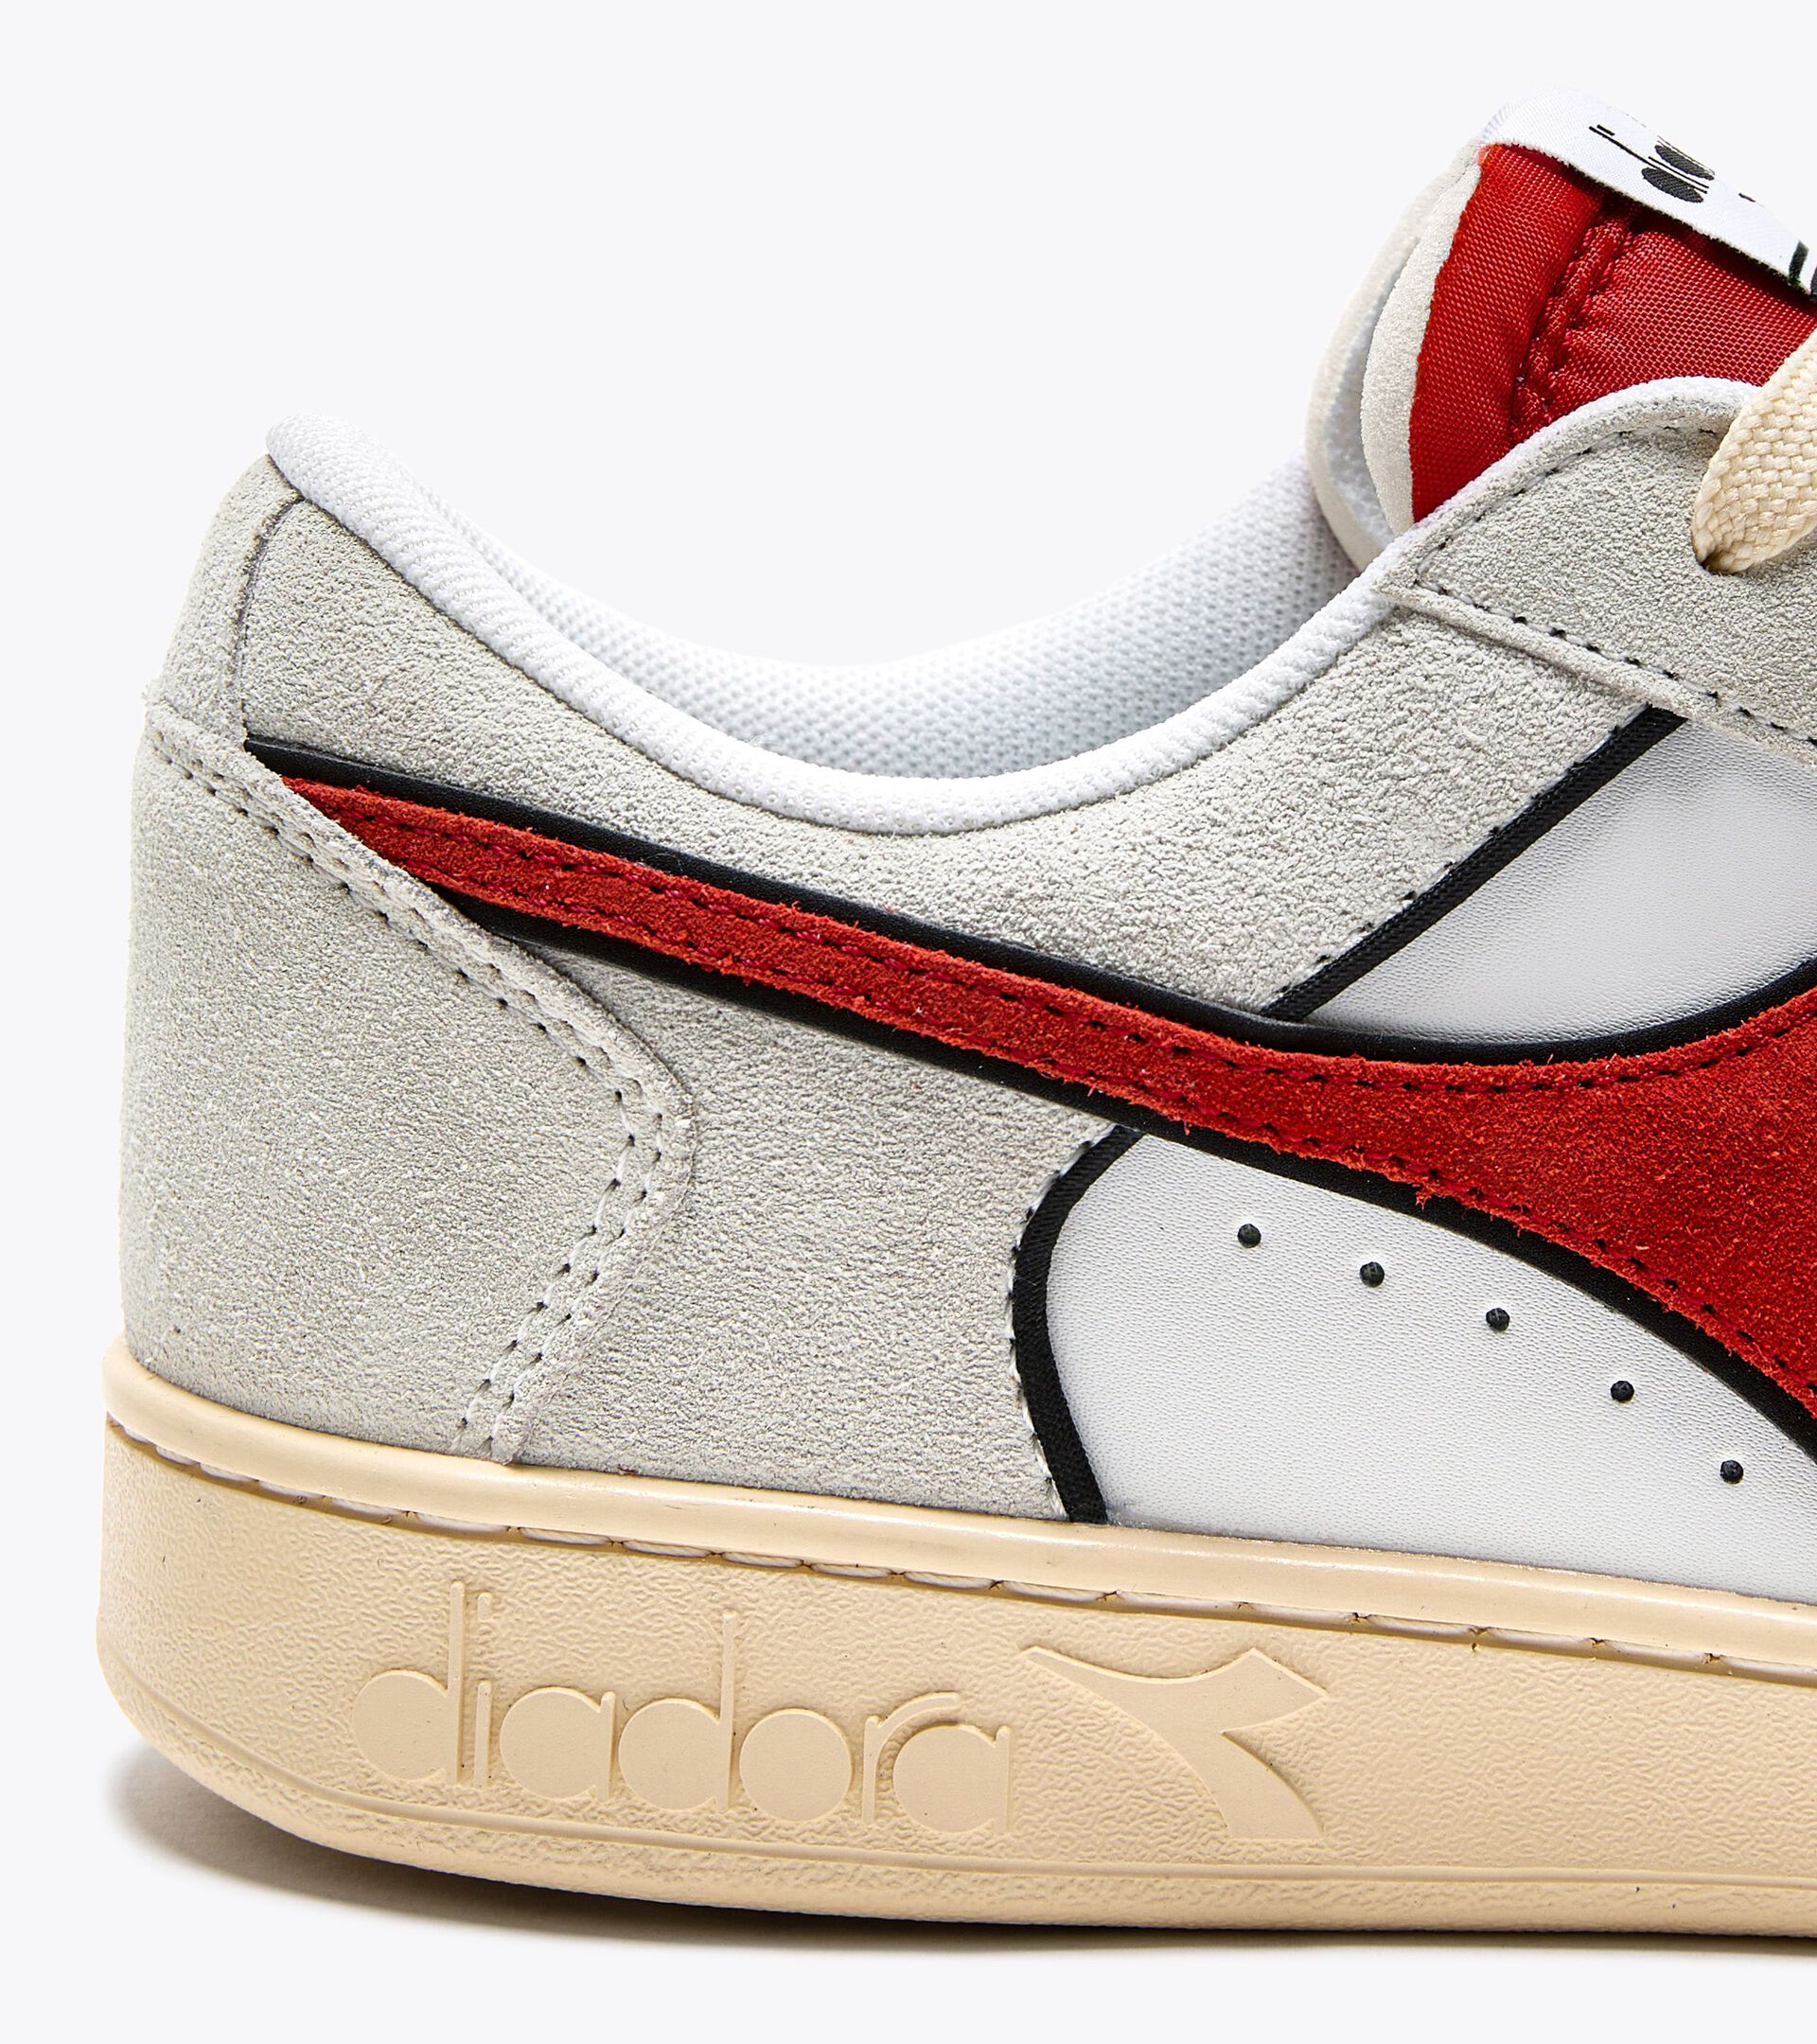 Sporty sneakers - Gender neutral MAGIC BASKET LOW SUEDE LEATHER WHITE/FERRARI RED ITALY - Diadora